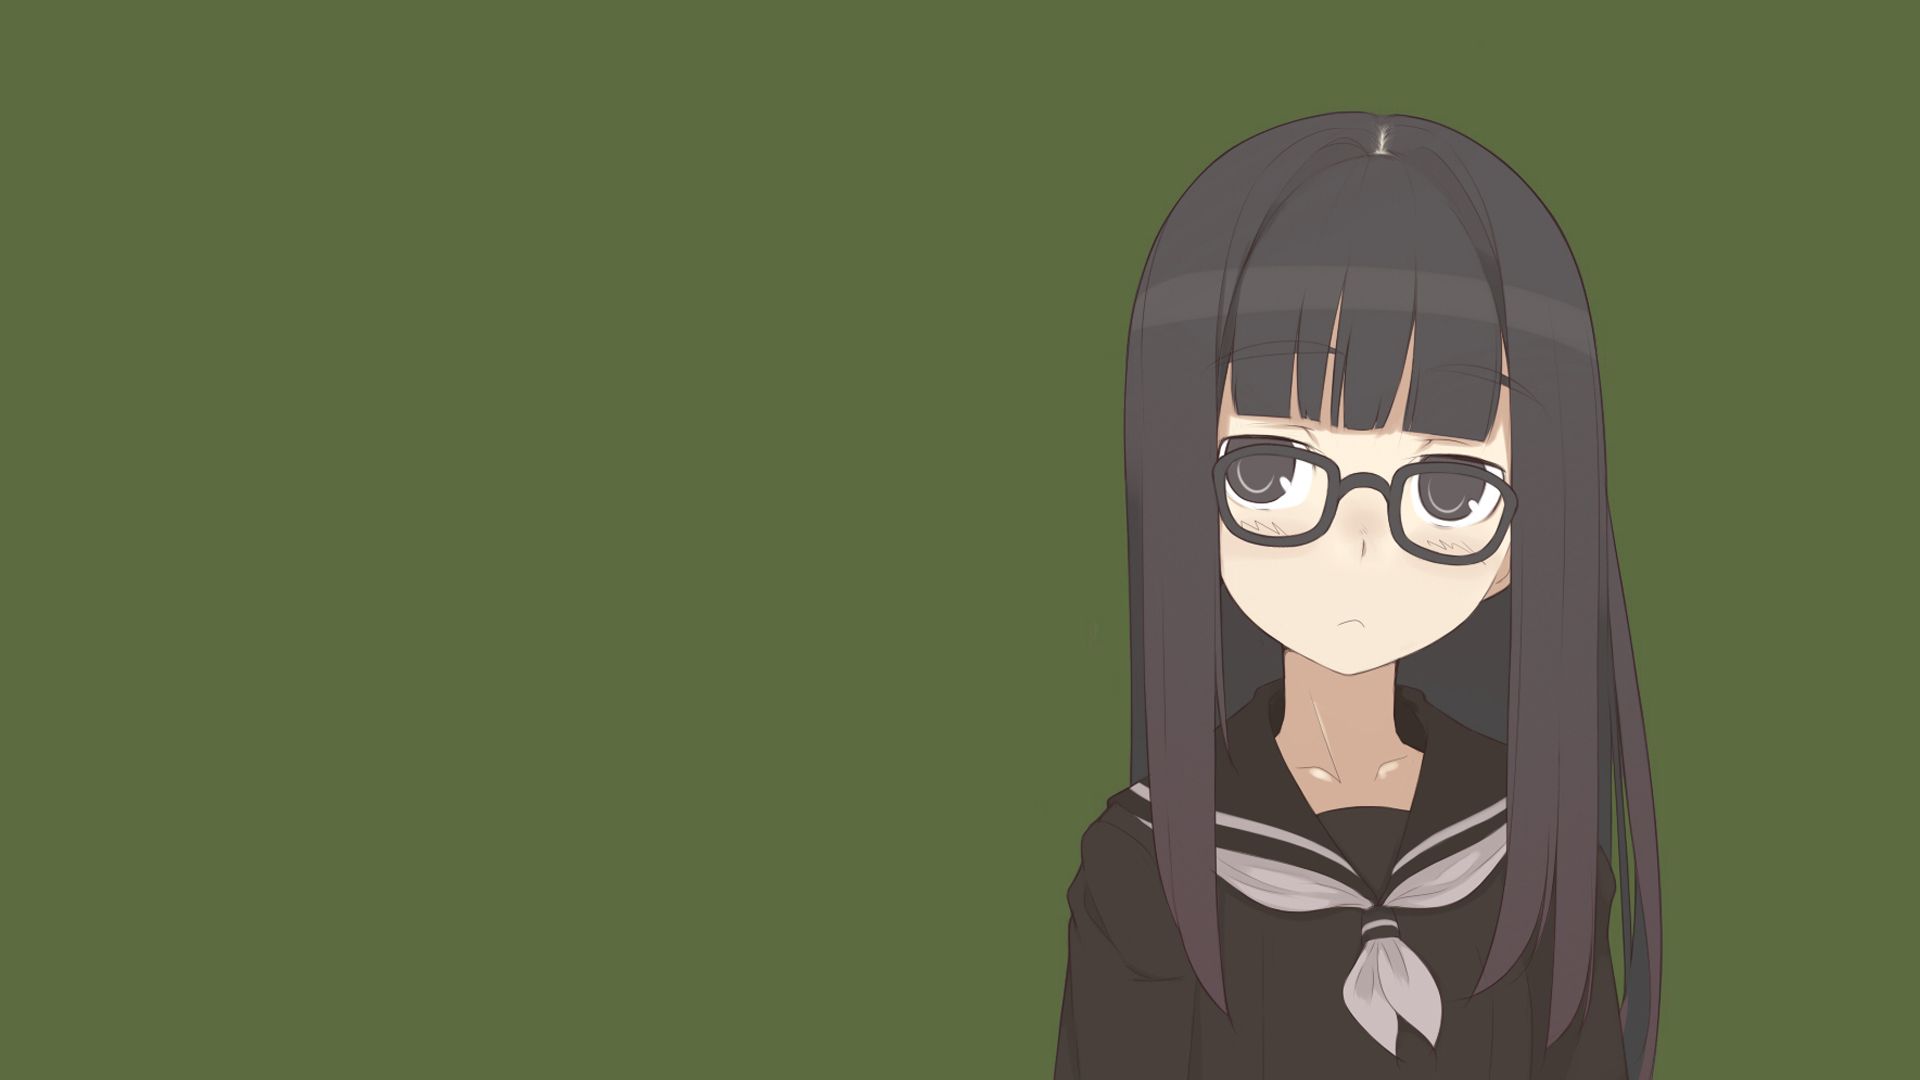 Pic Of Anime Girl With Glasses